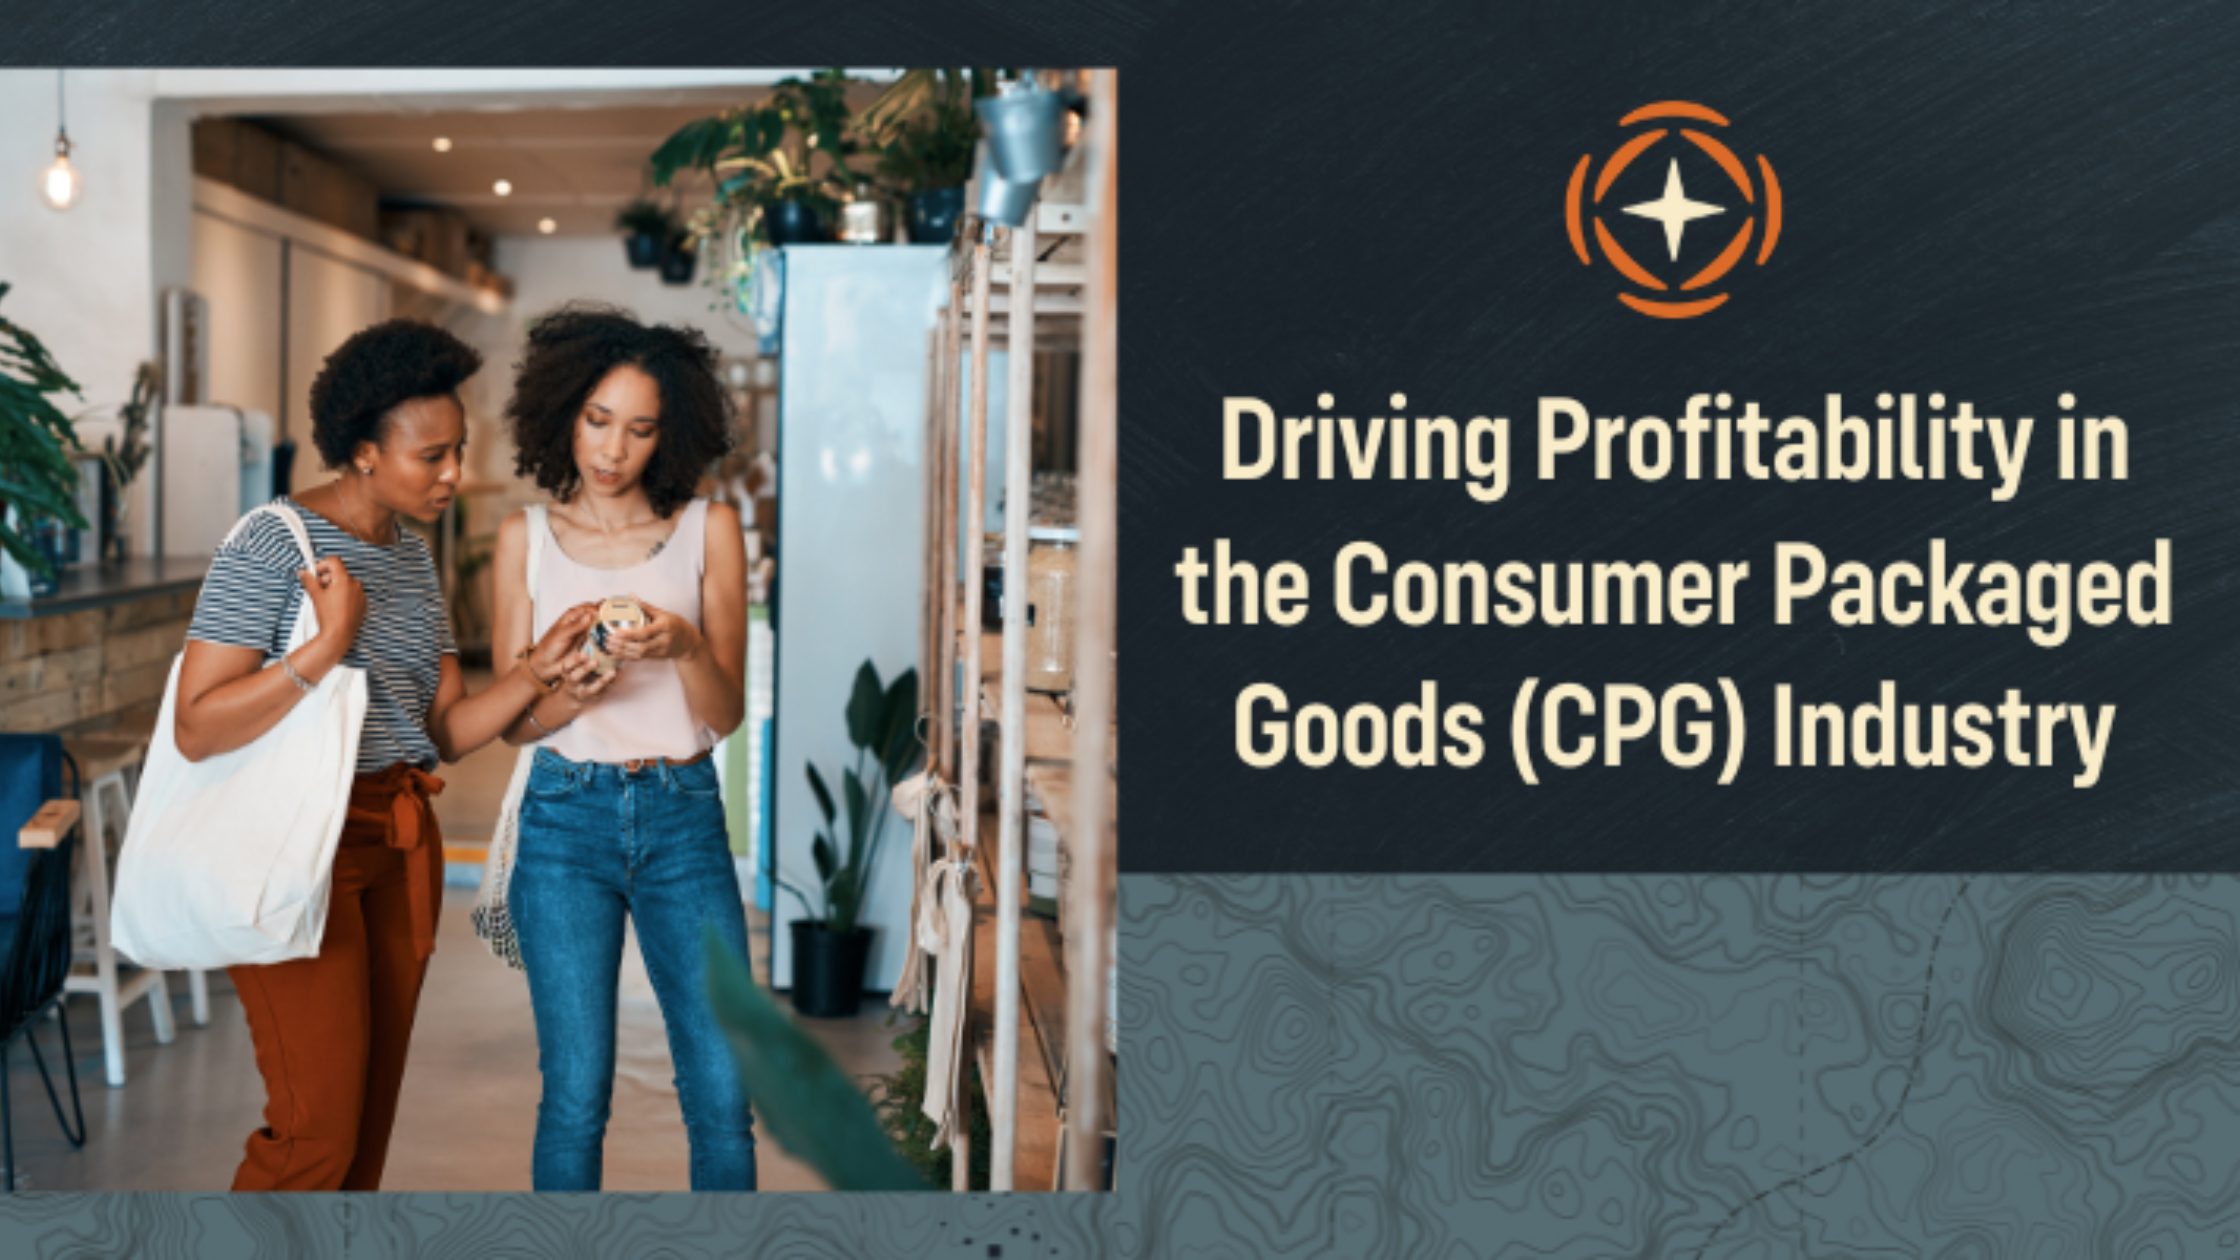 Driving Profitability in the Consumer Packaged Goods (CPG) Industry: A Customer-Centric Approach